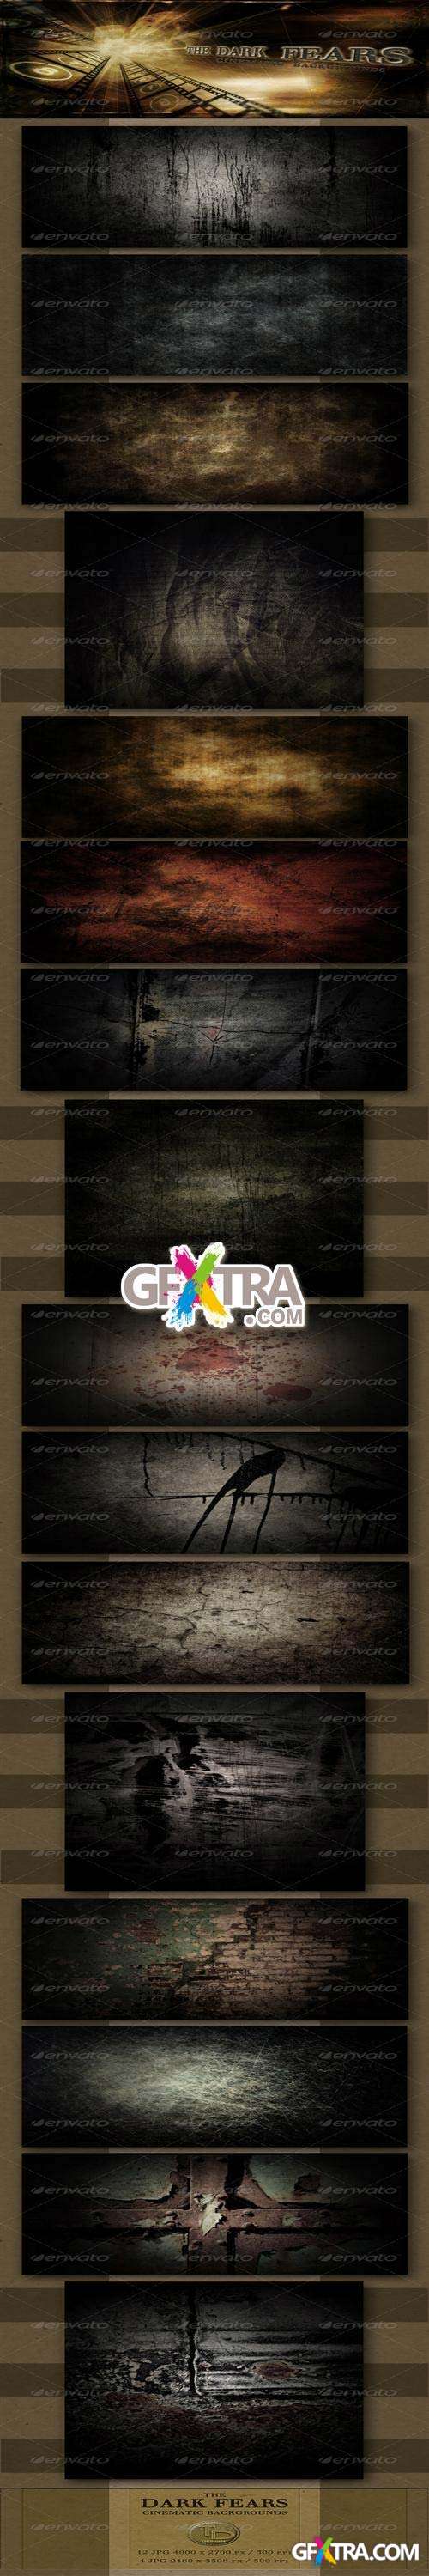 GraphicRiver: The Dark Fears - Cinematic Backgrounds